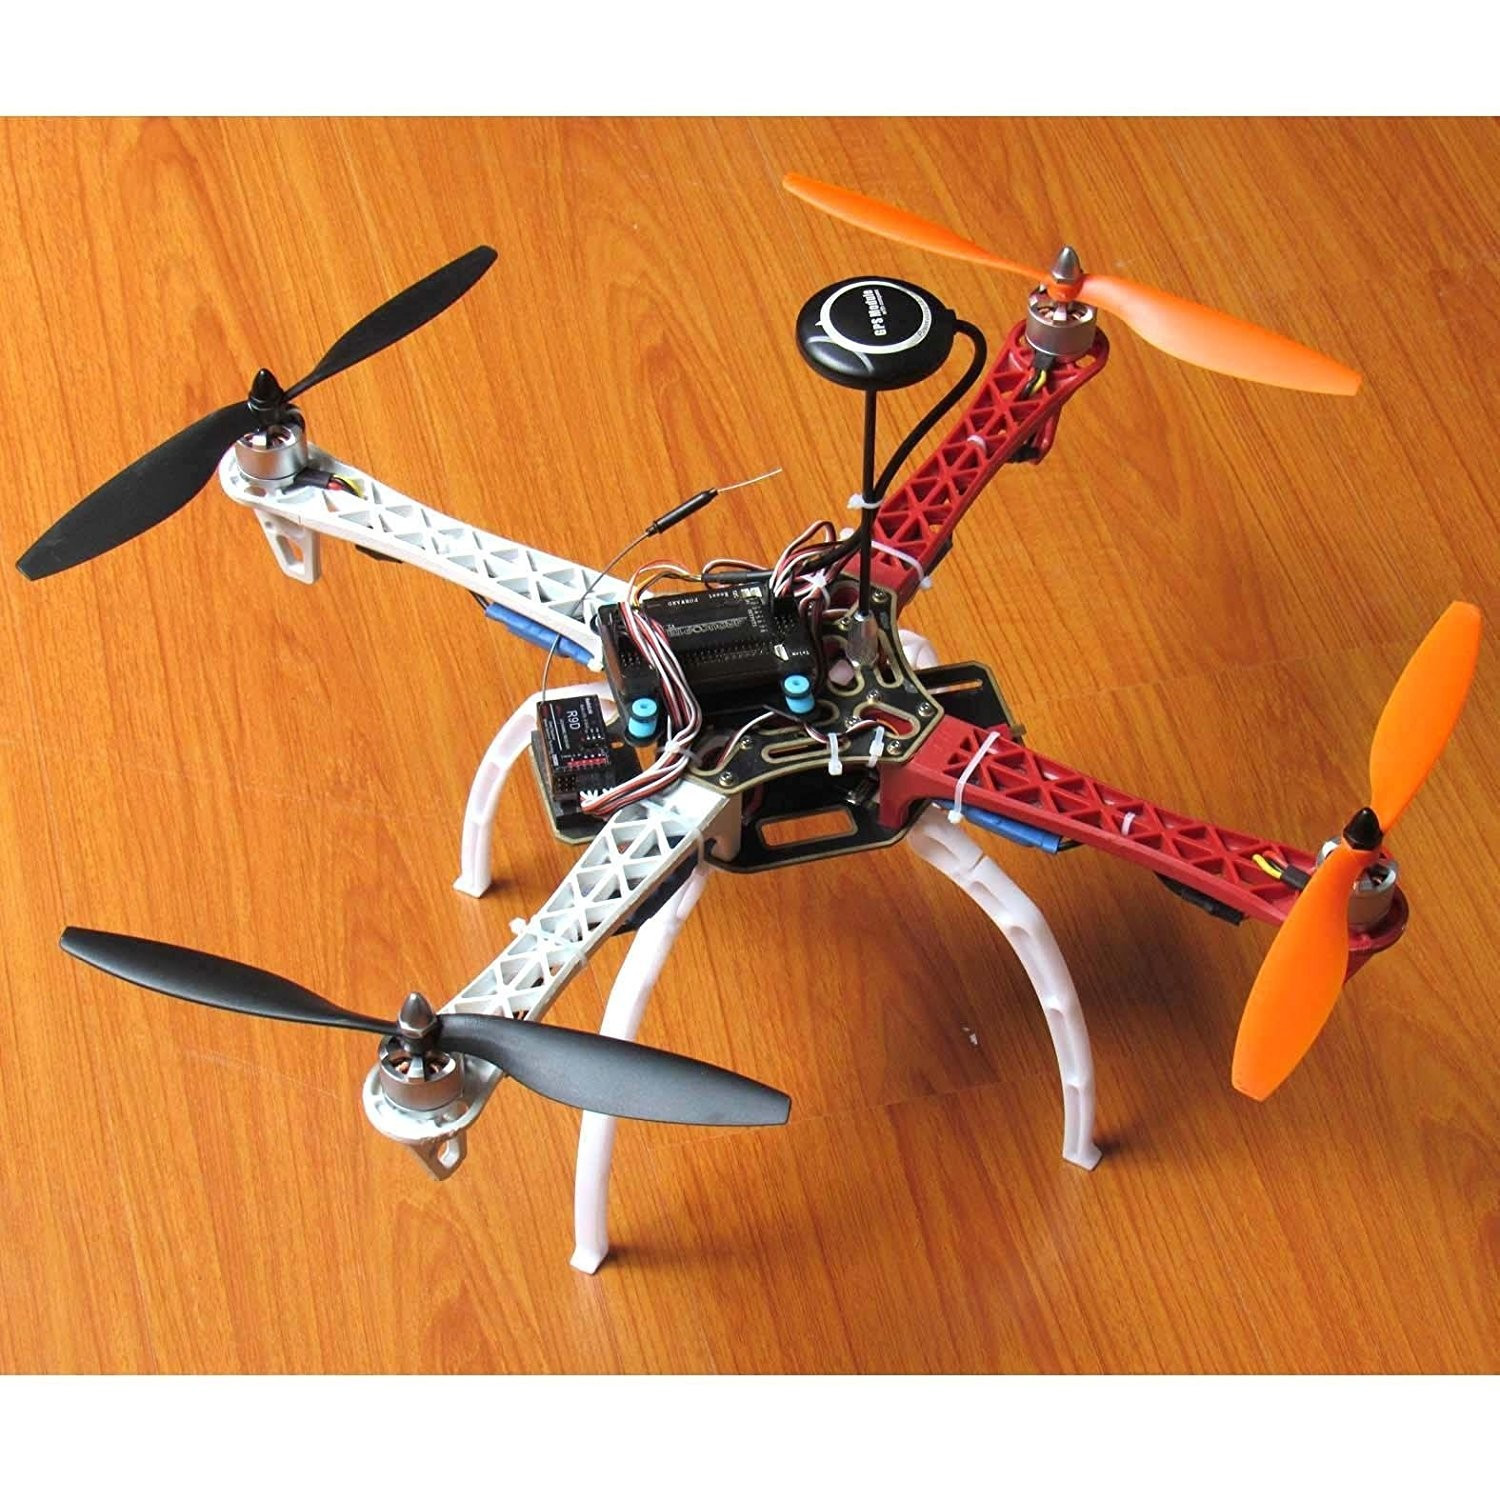 Quadcopter DIY Kits
 Best Hobbypower ATF DIY F450 Quadcopter Kit With APM2 8